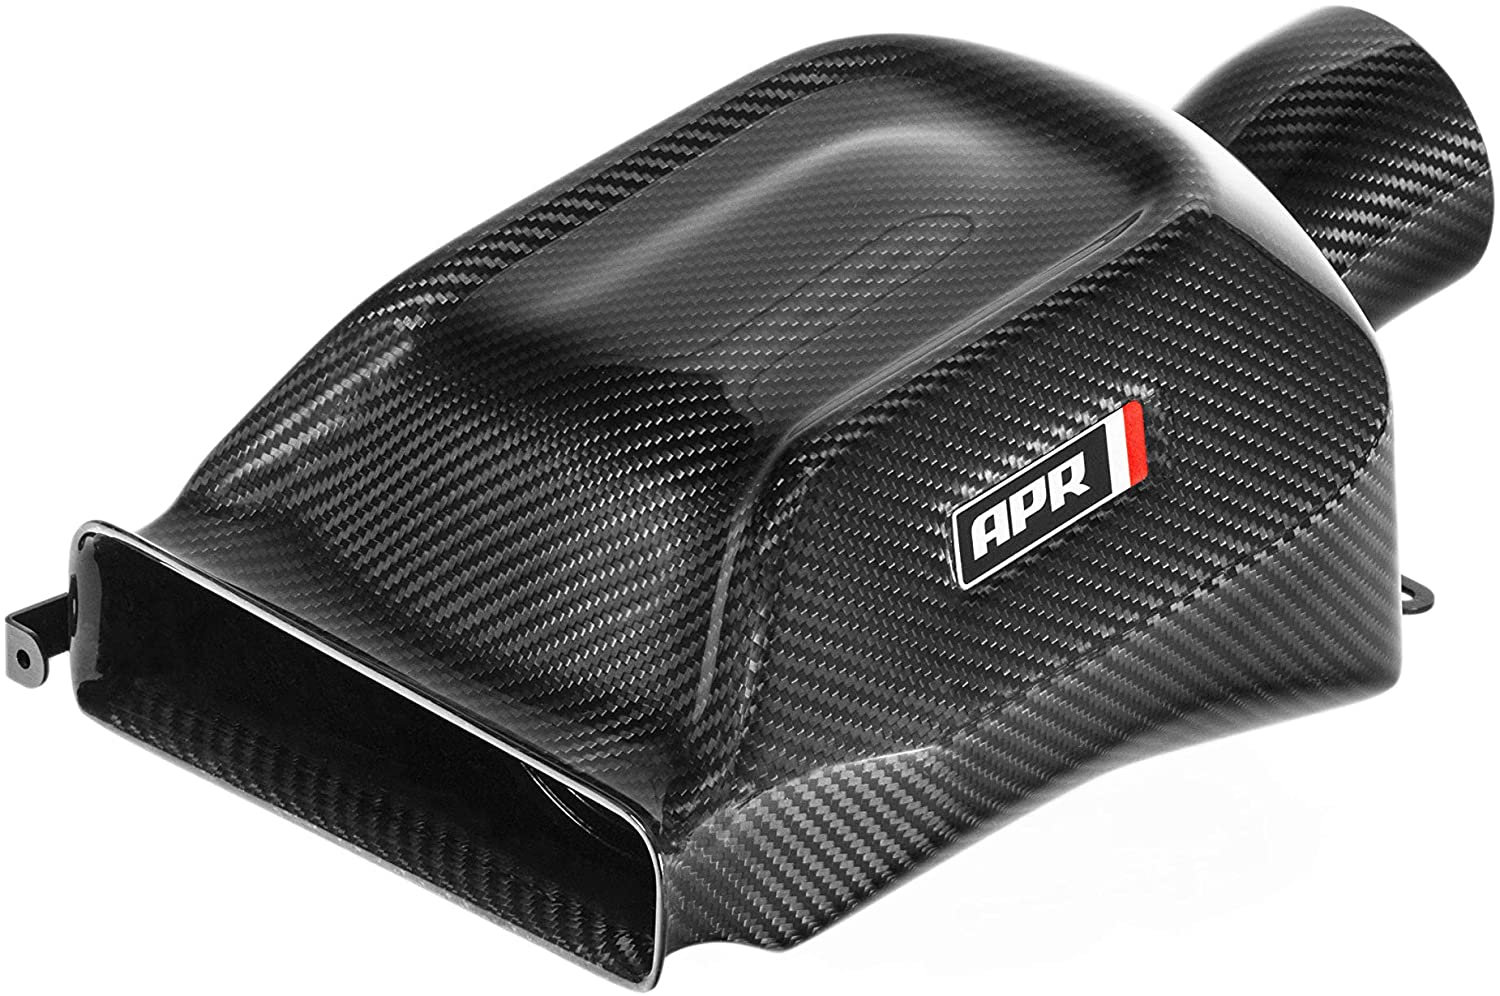 Image of Ansaugsystem APR Carbon Air Intake System für Volkswagen Scirocco 137 2.0 TSI 211ps